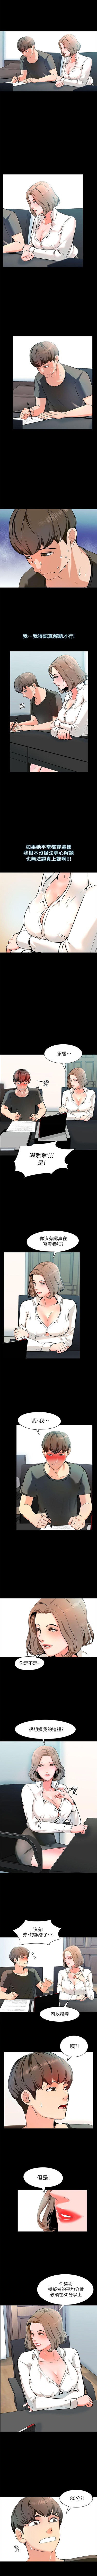 Perfect Girl Porn 家教老師 1-40 官方中文（連載中） Classic - Page 6